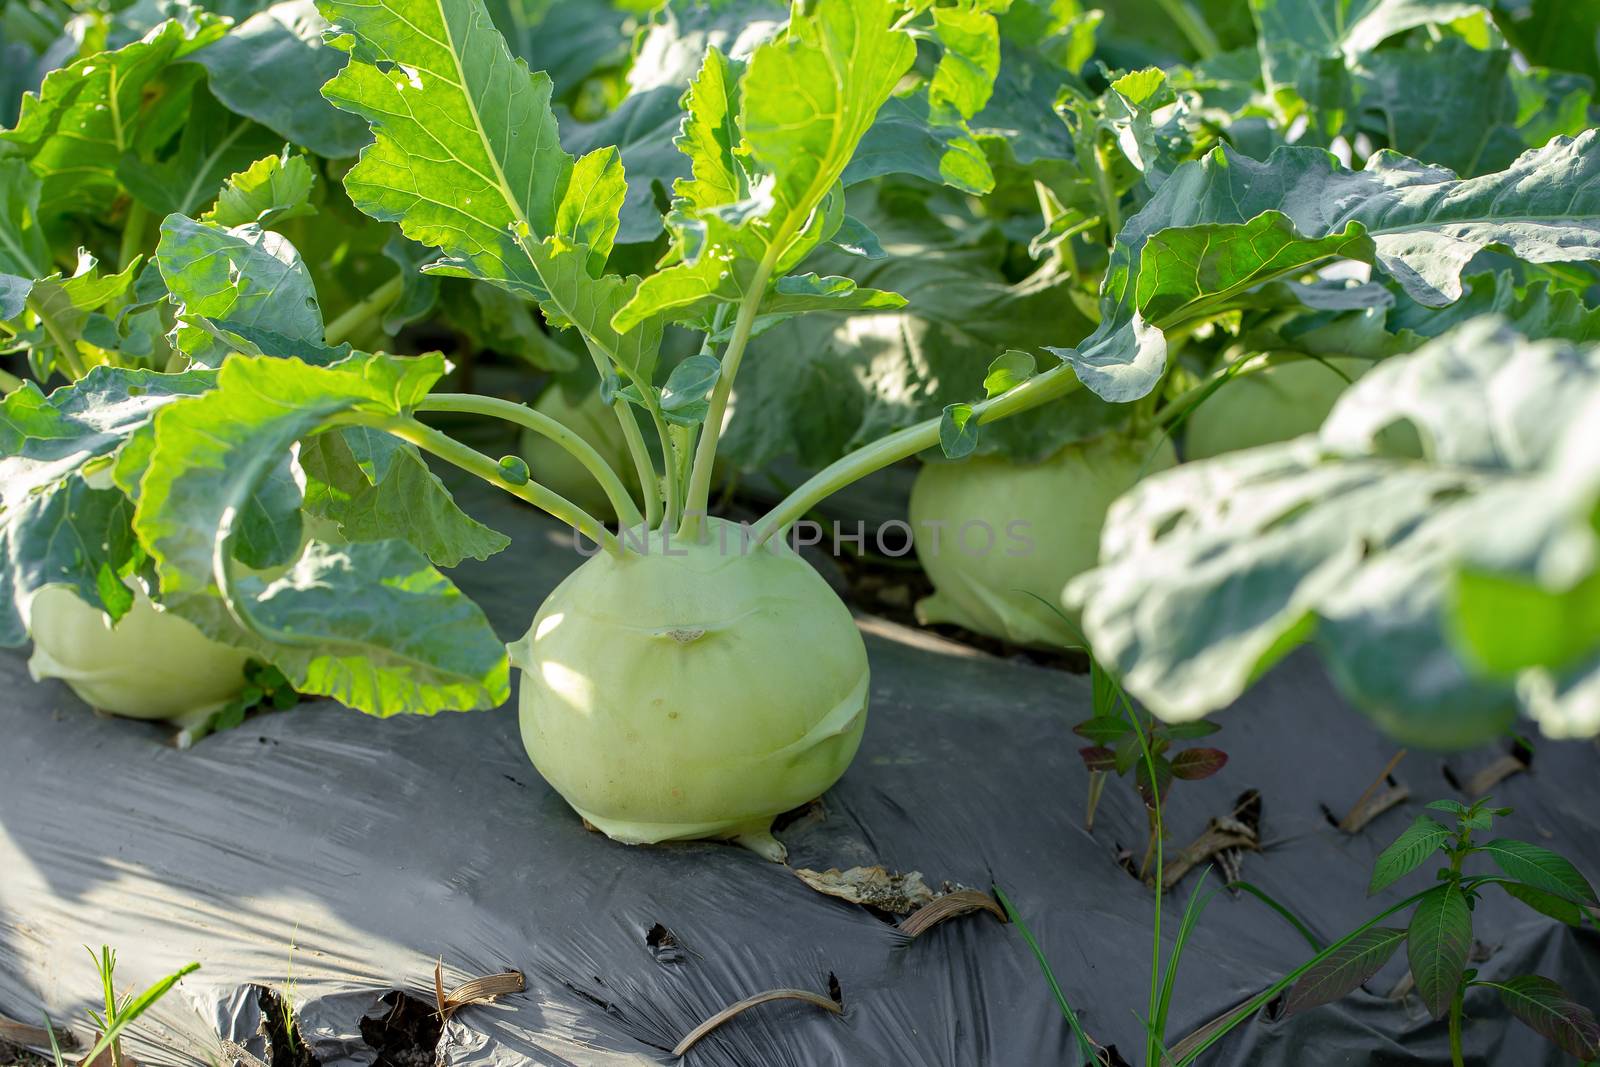 Kohlrabi cabbage or turnip plant growing in in the garden by kaiskynet